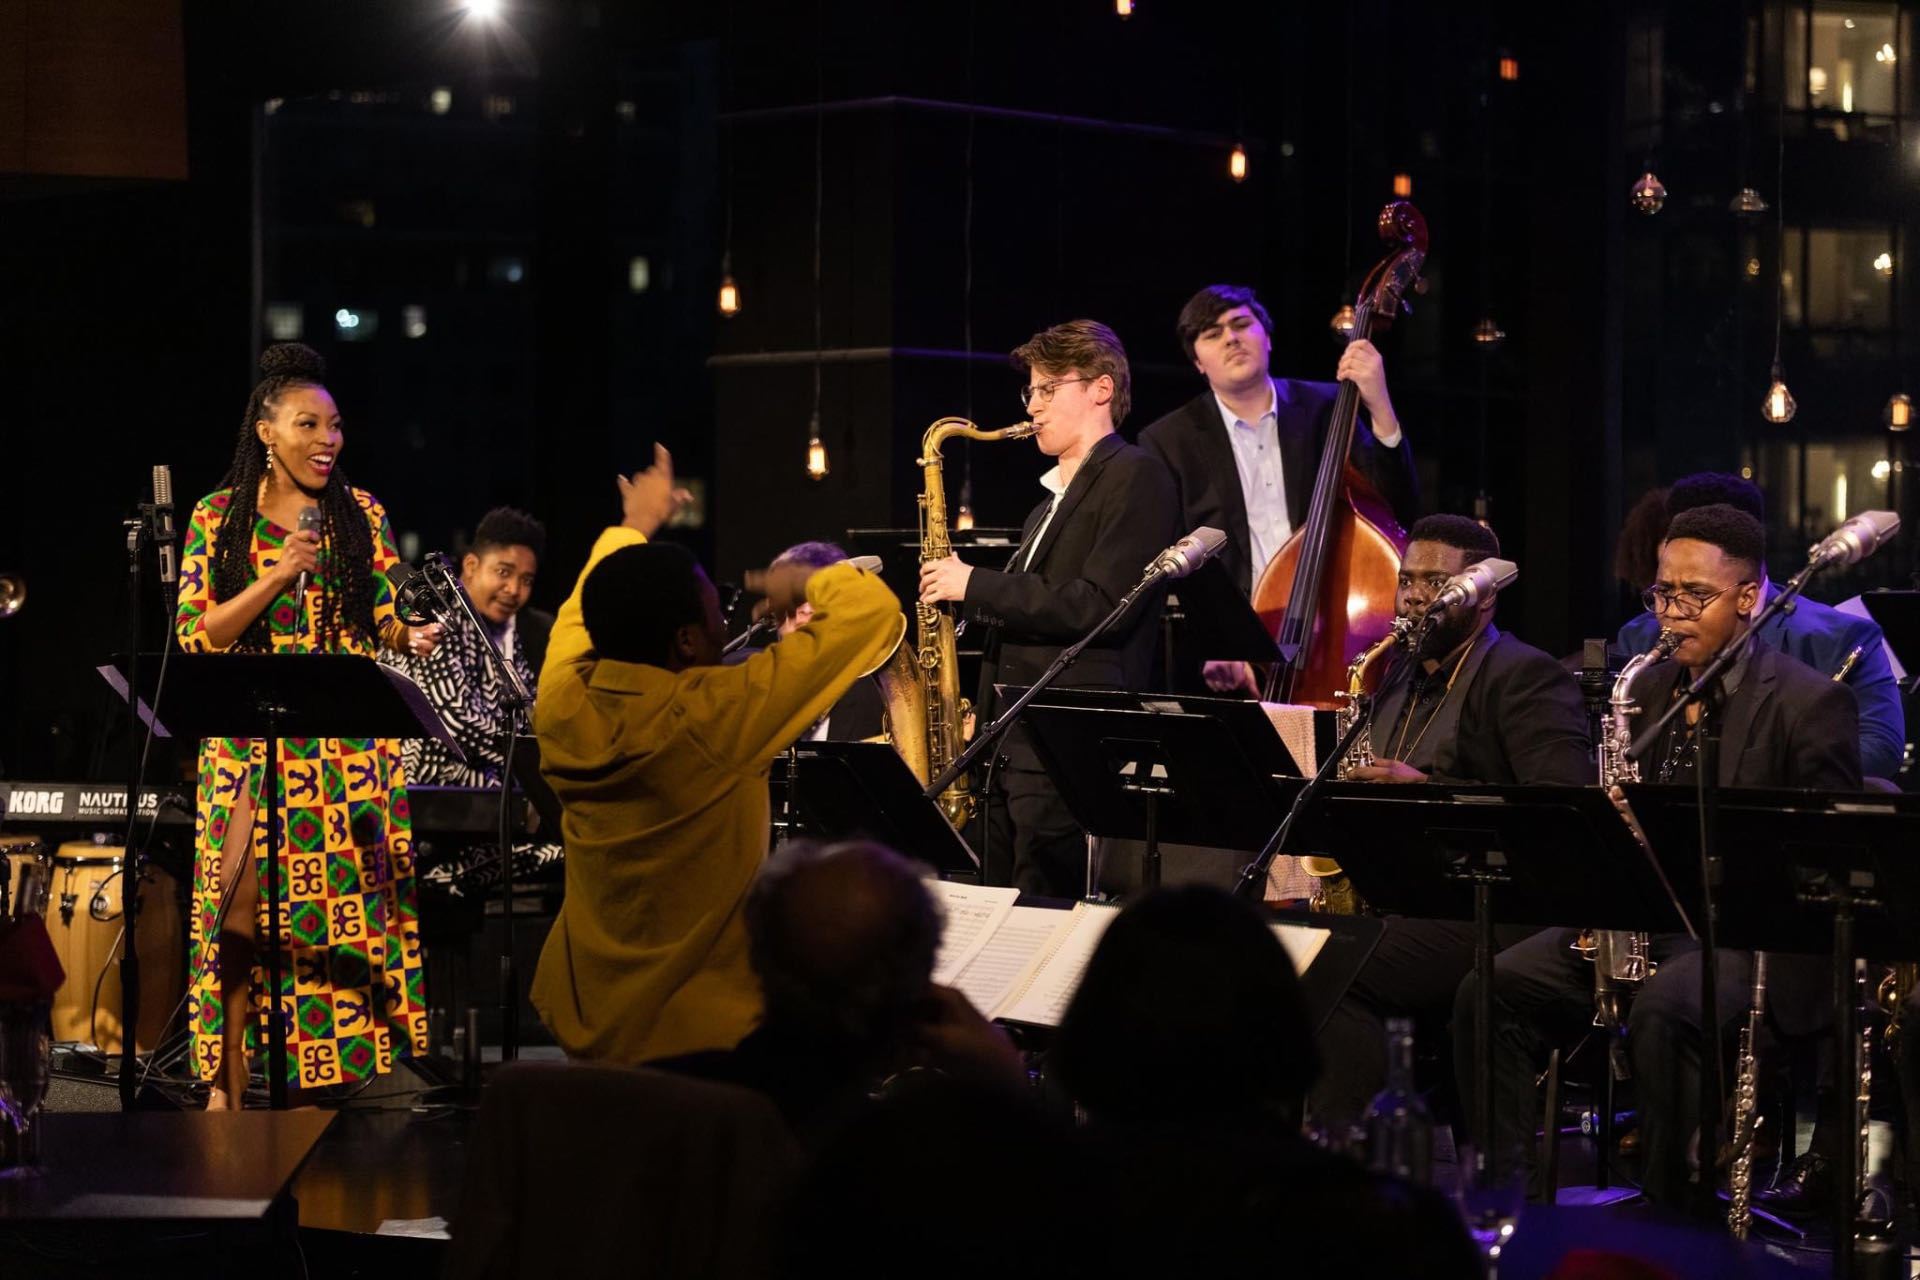 An undated photo of South African artist Moe performing with other musicians. / Photo provided to CGTN